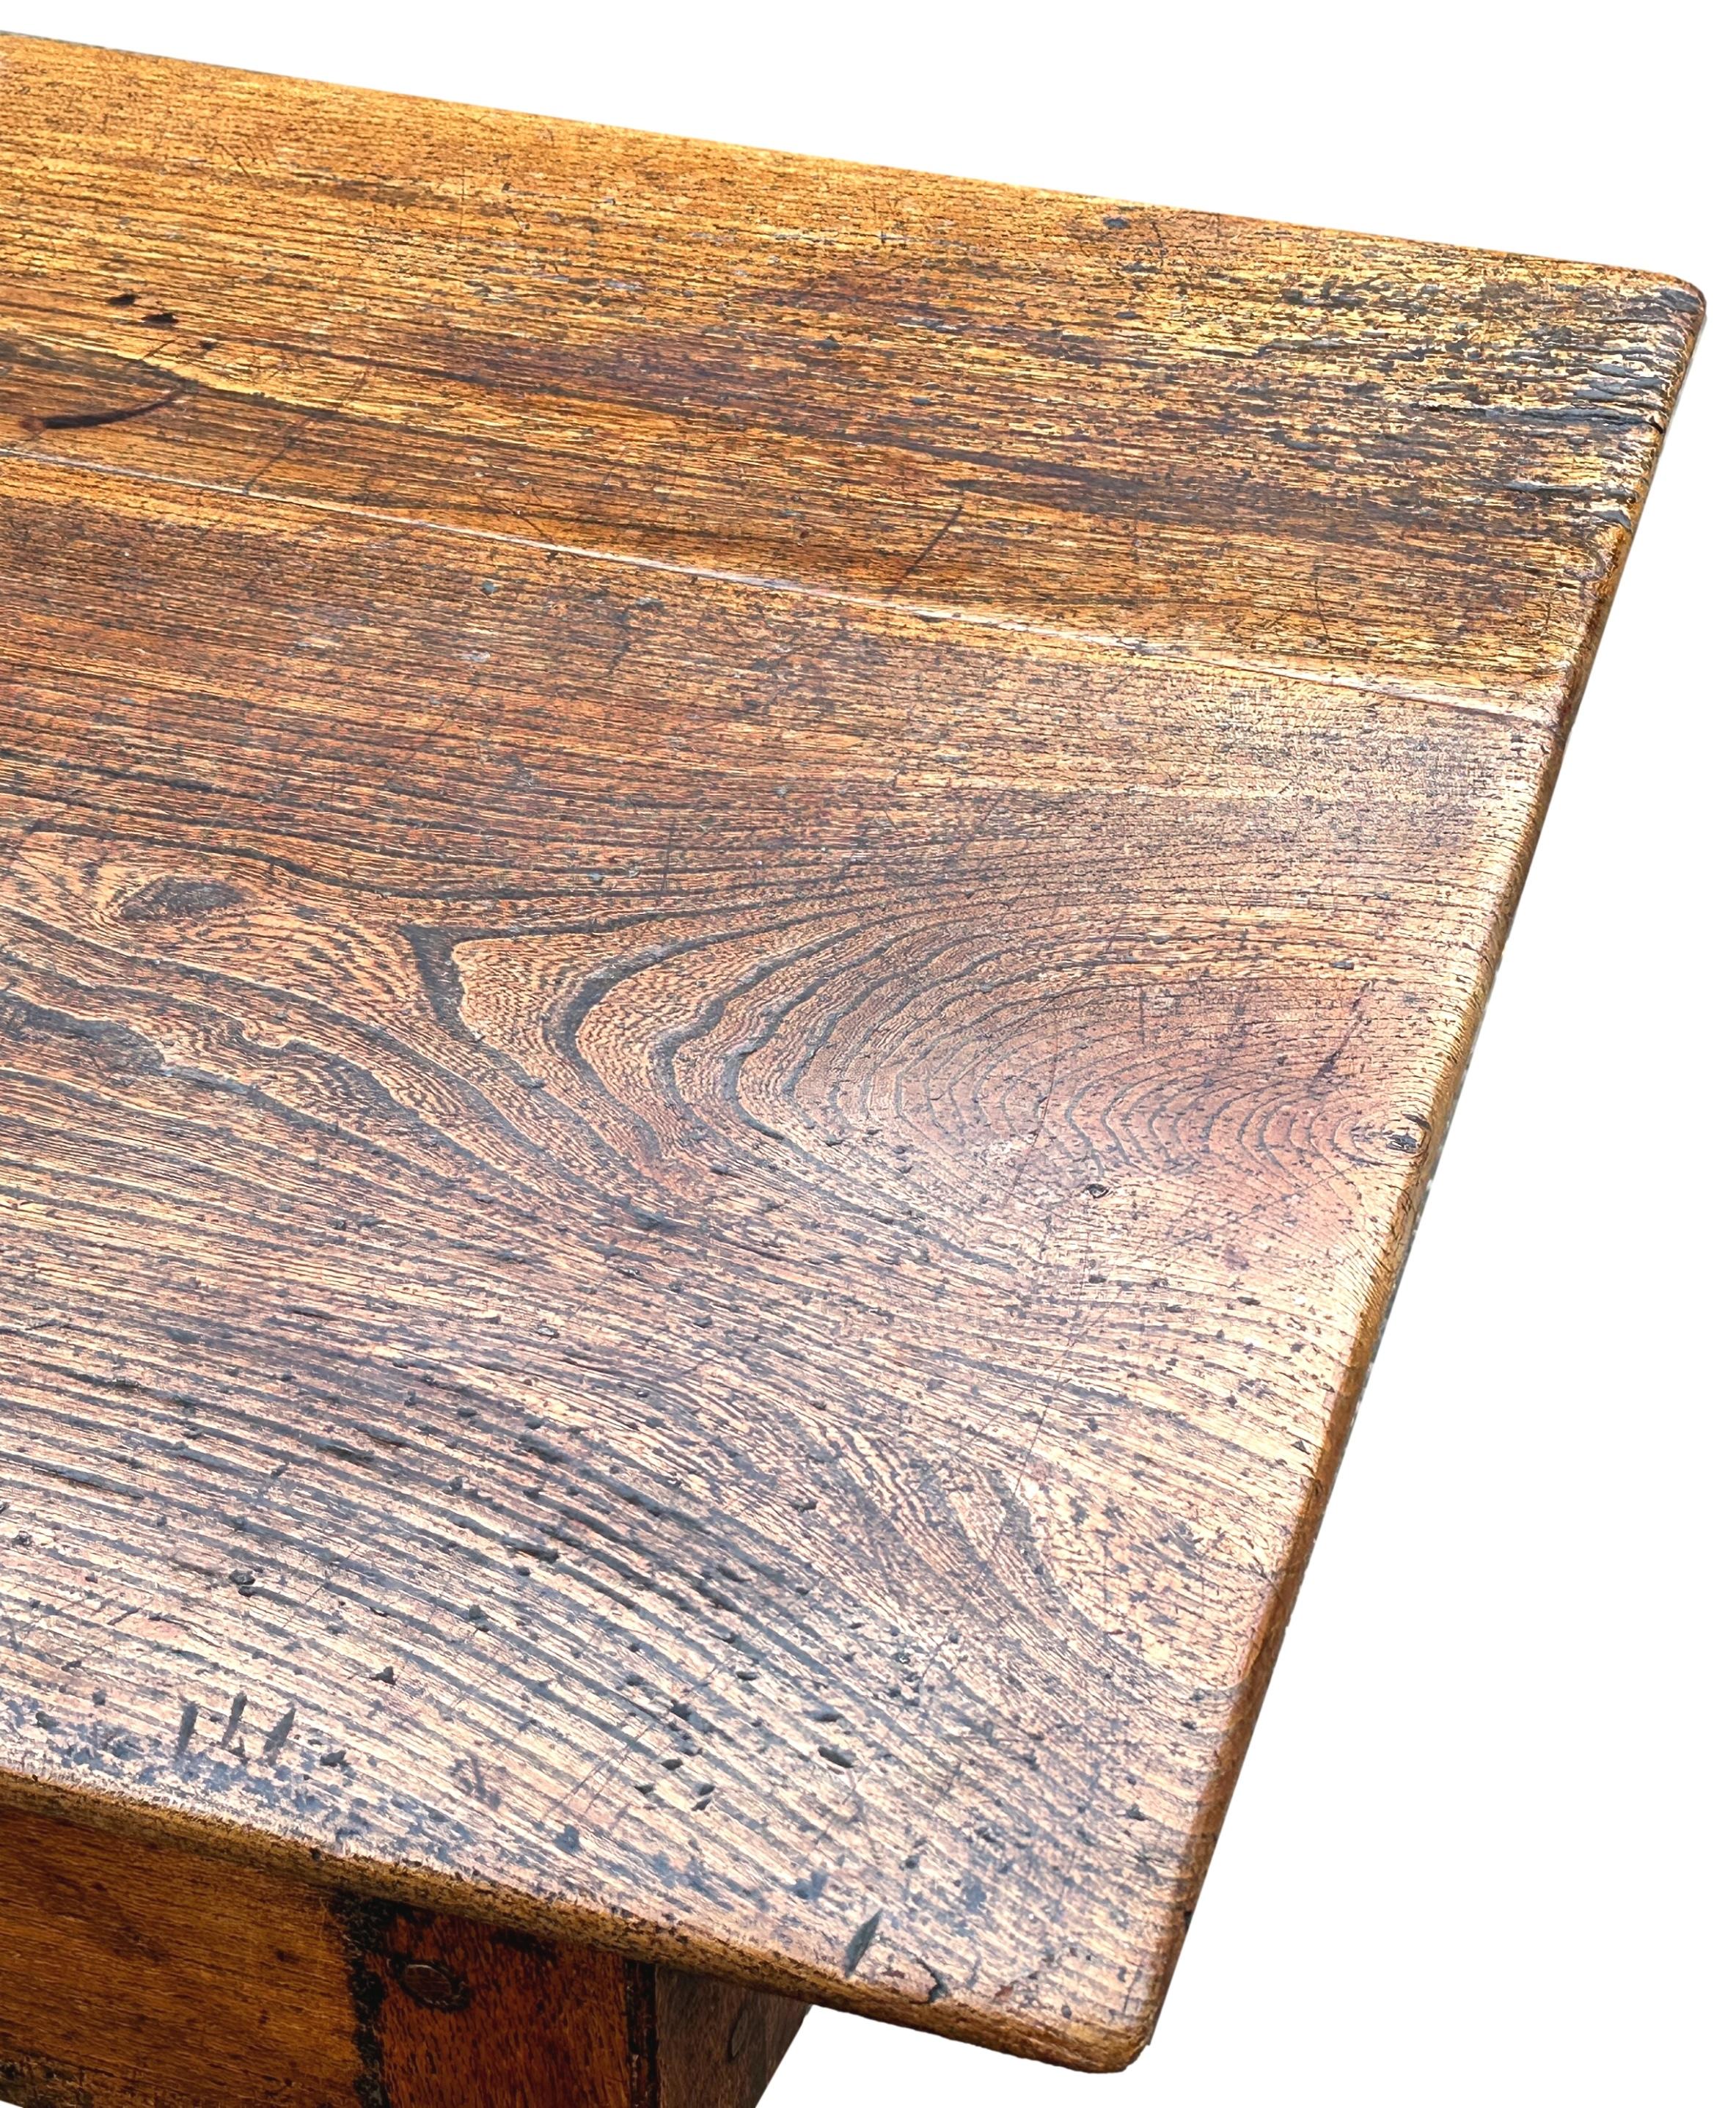 A Stunning And Rarely Found Genuinely 18th Century Georgian English Elm Farmhouse Kitchen Dining Table, Or Refectory Table, To Seat 8 Very Comfortably, Having Superbly Figured Plank Top Retaining Exceptional Untouched Colour And Patina, With One